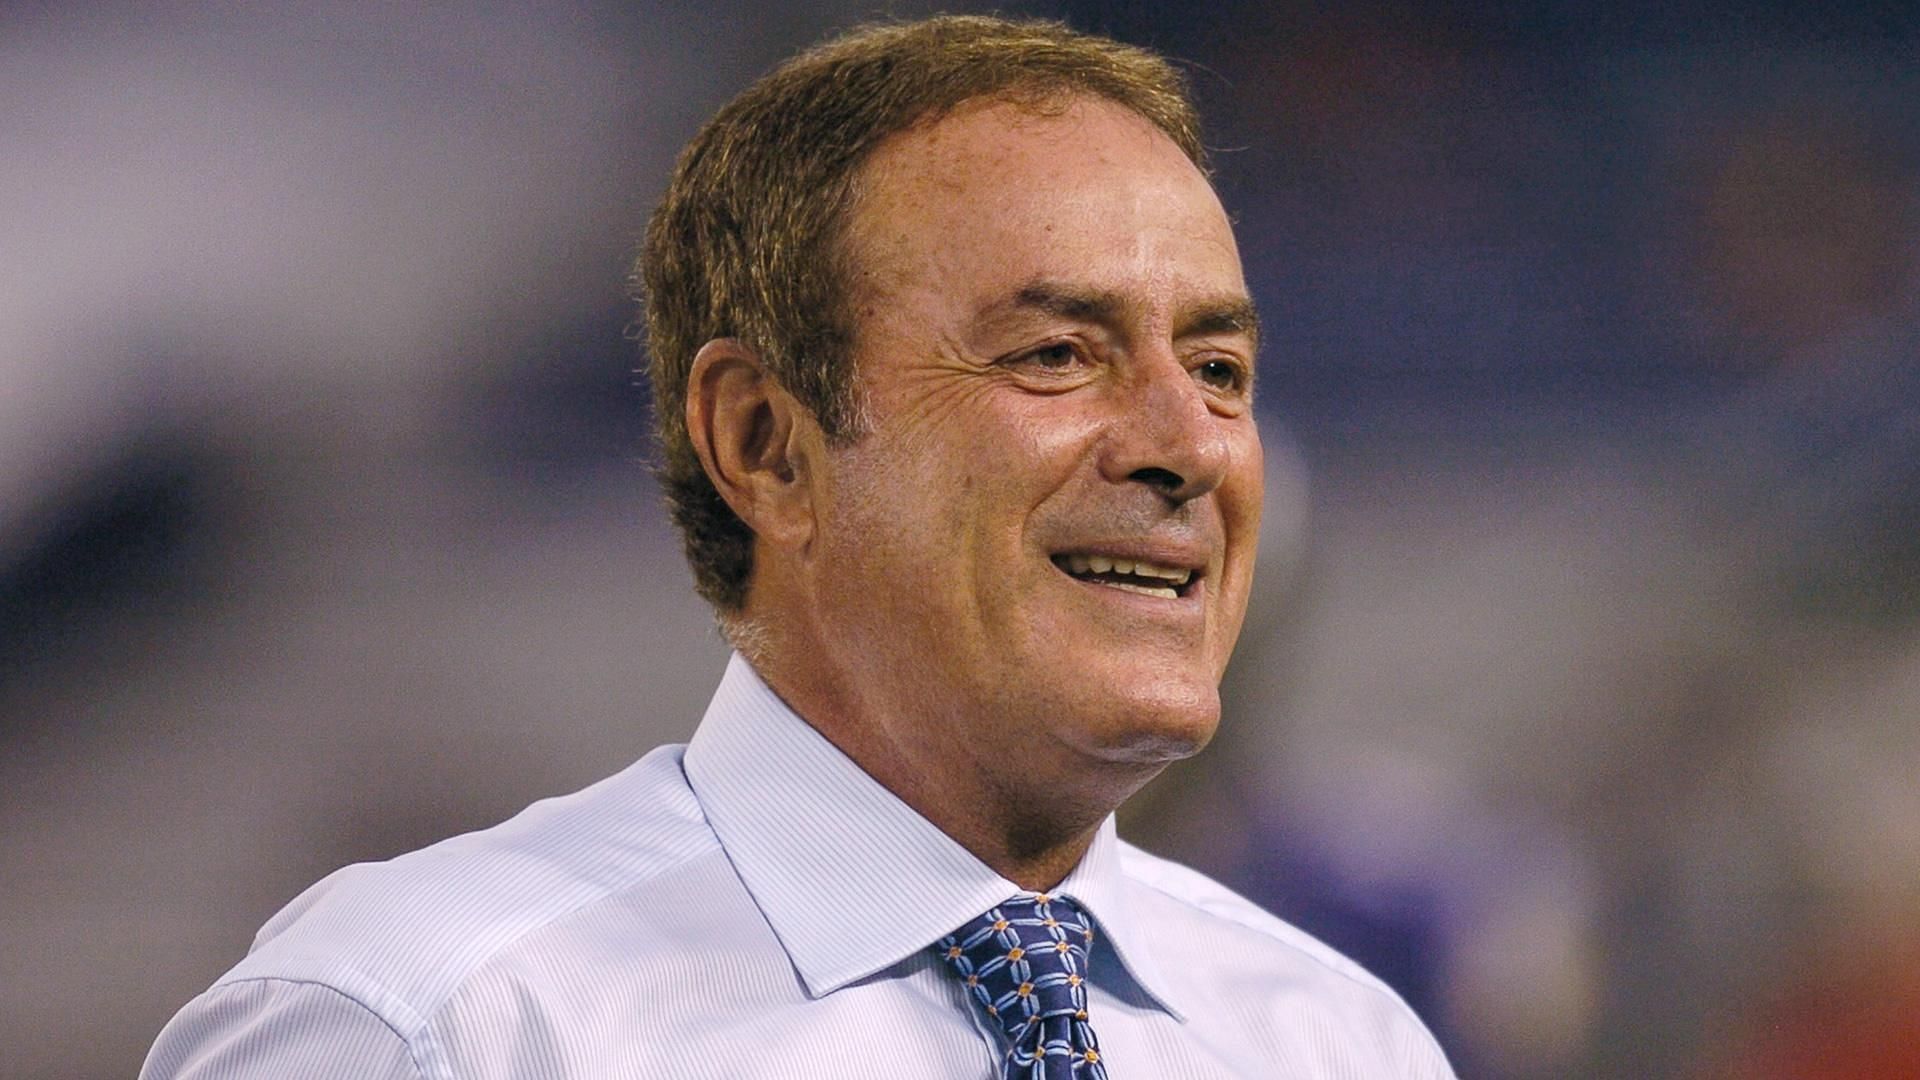 Who will replace Al Michaels for NFL Playoffs? Inside NBC